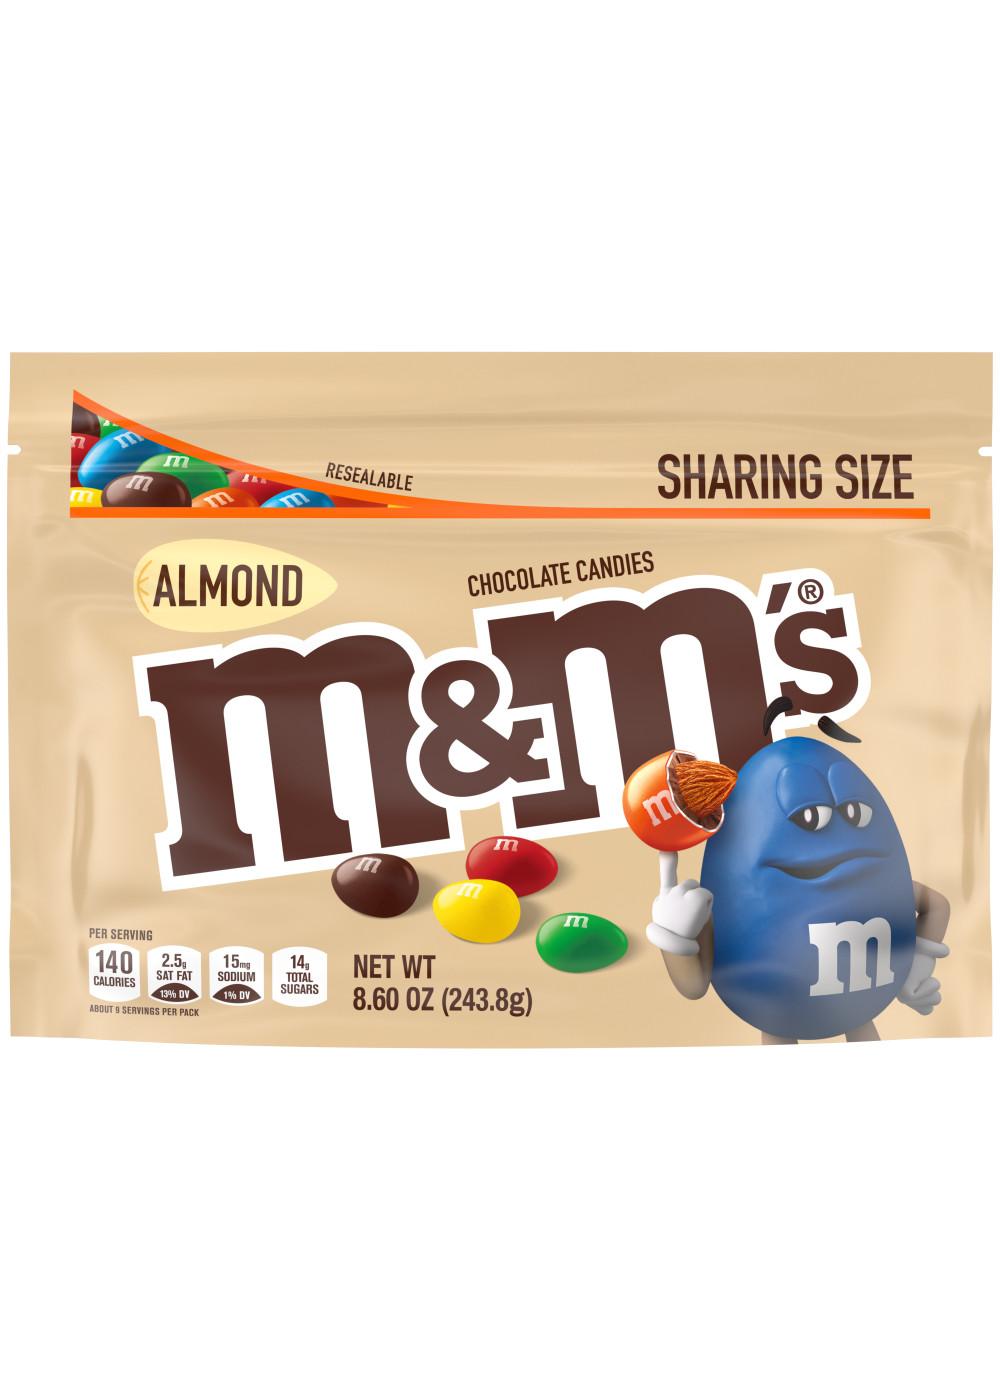 M&M'S Almond Chocolate Candy - Sharing Size; image 1 of 4